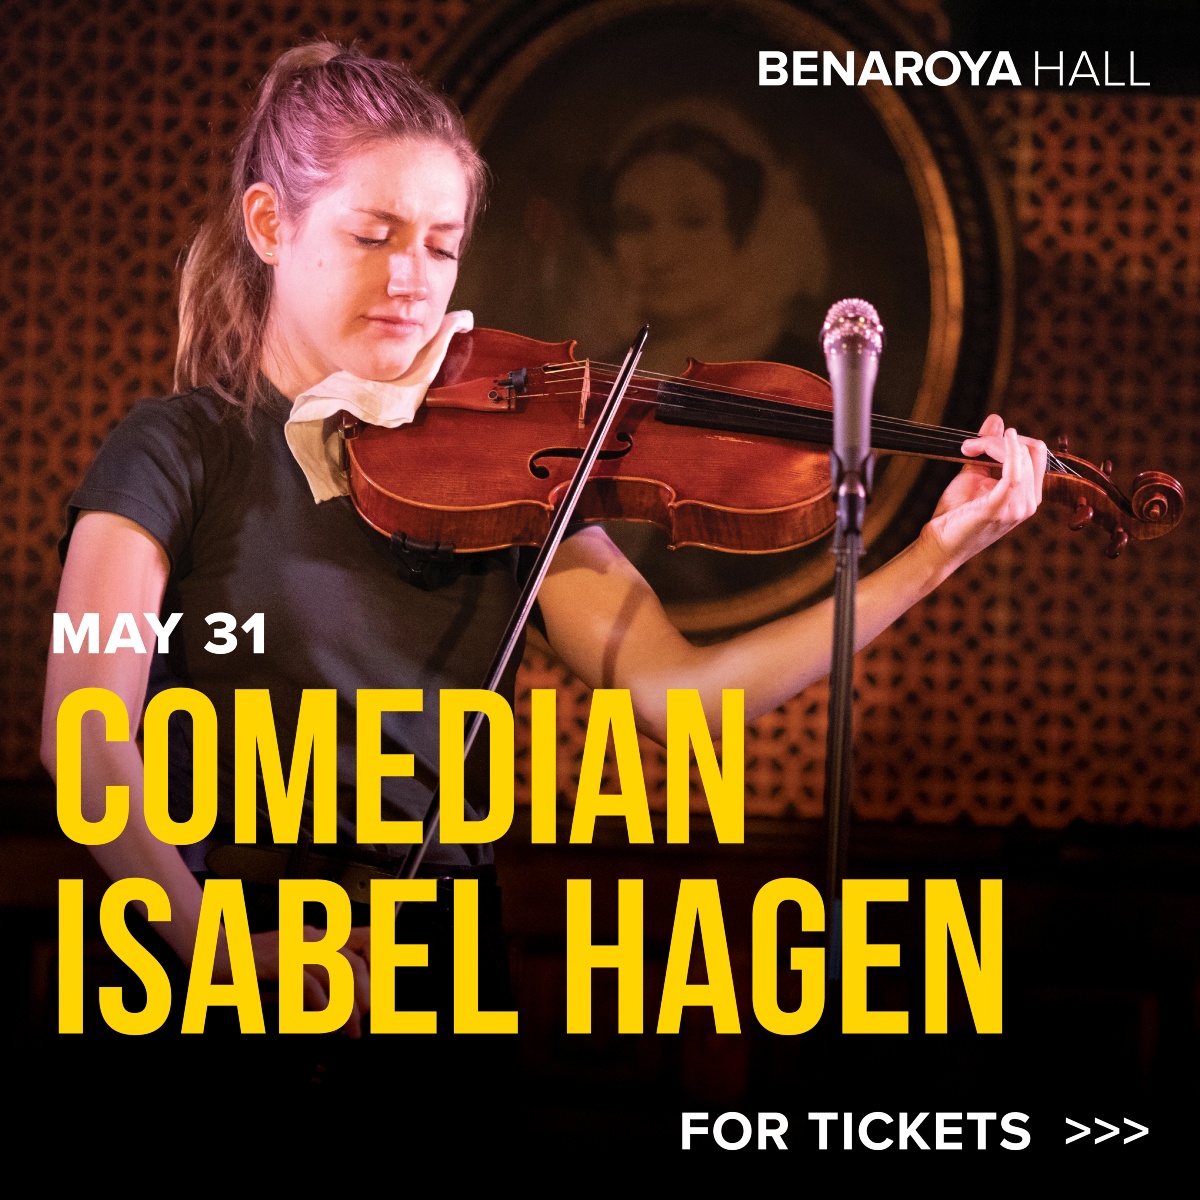 Stand-up comedian and classically trained violist Isabel Hagen makes her Benaroya Hall debut on May 31st. Don't miss this unique show and enter to win your pair of tickets today! t.dostuffmedia.com/t/c/s/140800